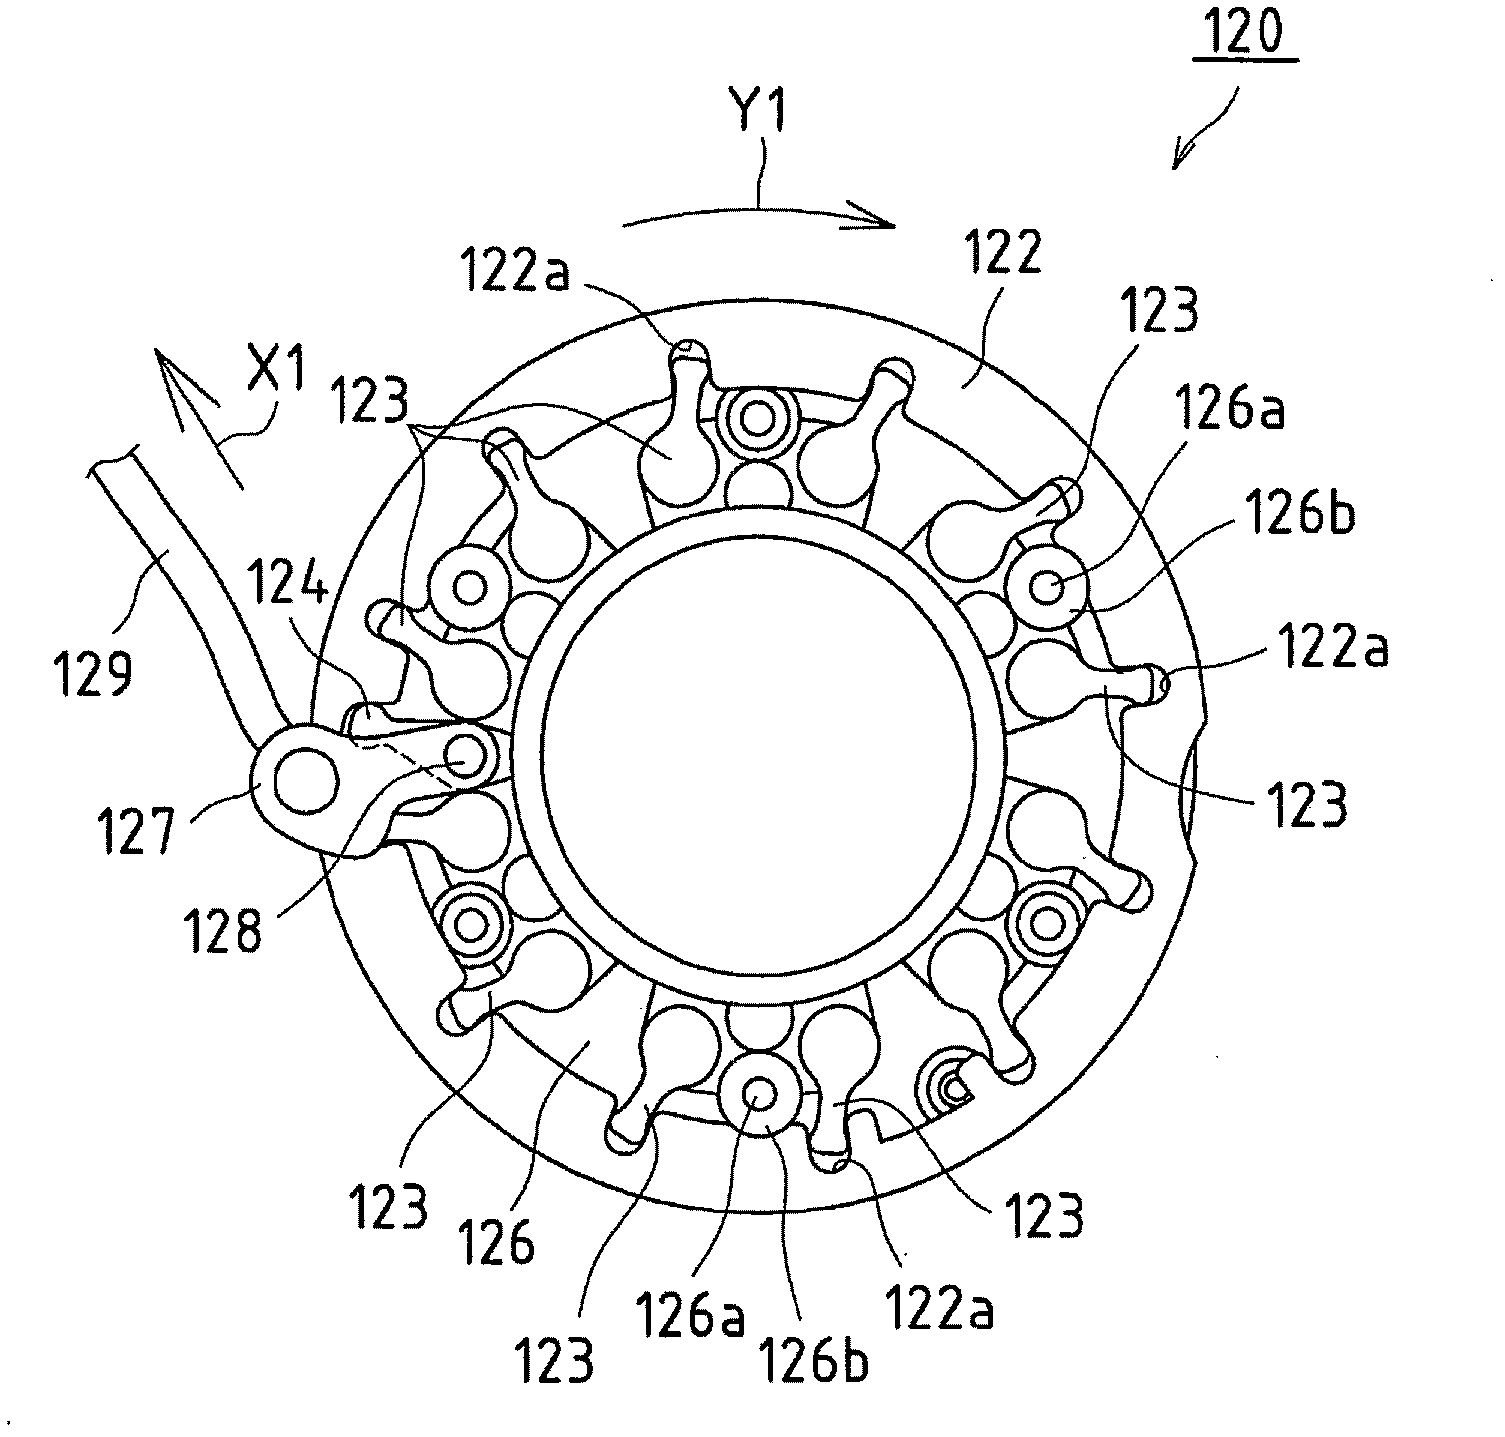 Apparatus for controlling internal combustion engine provided with turbocharger